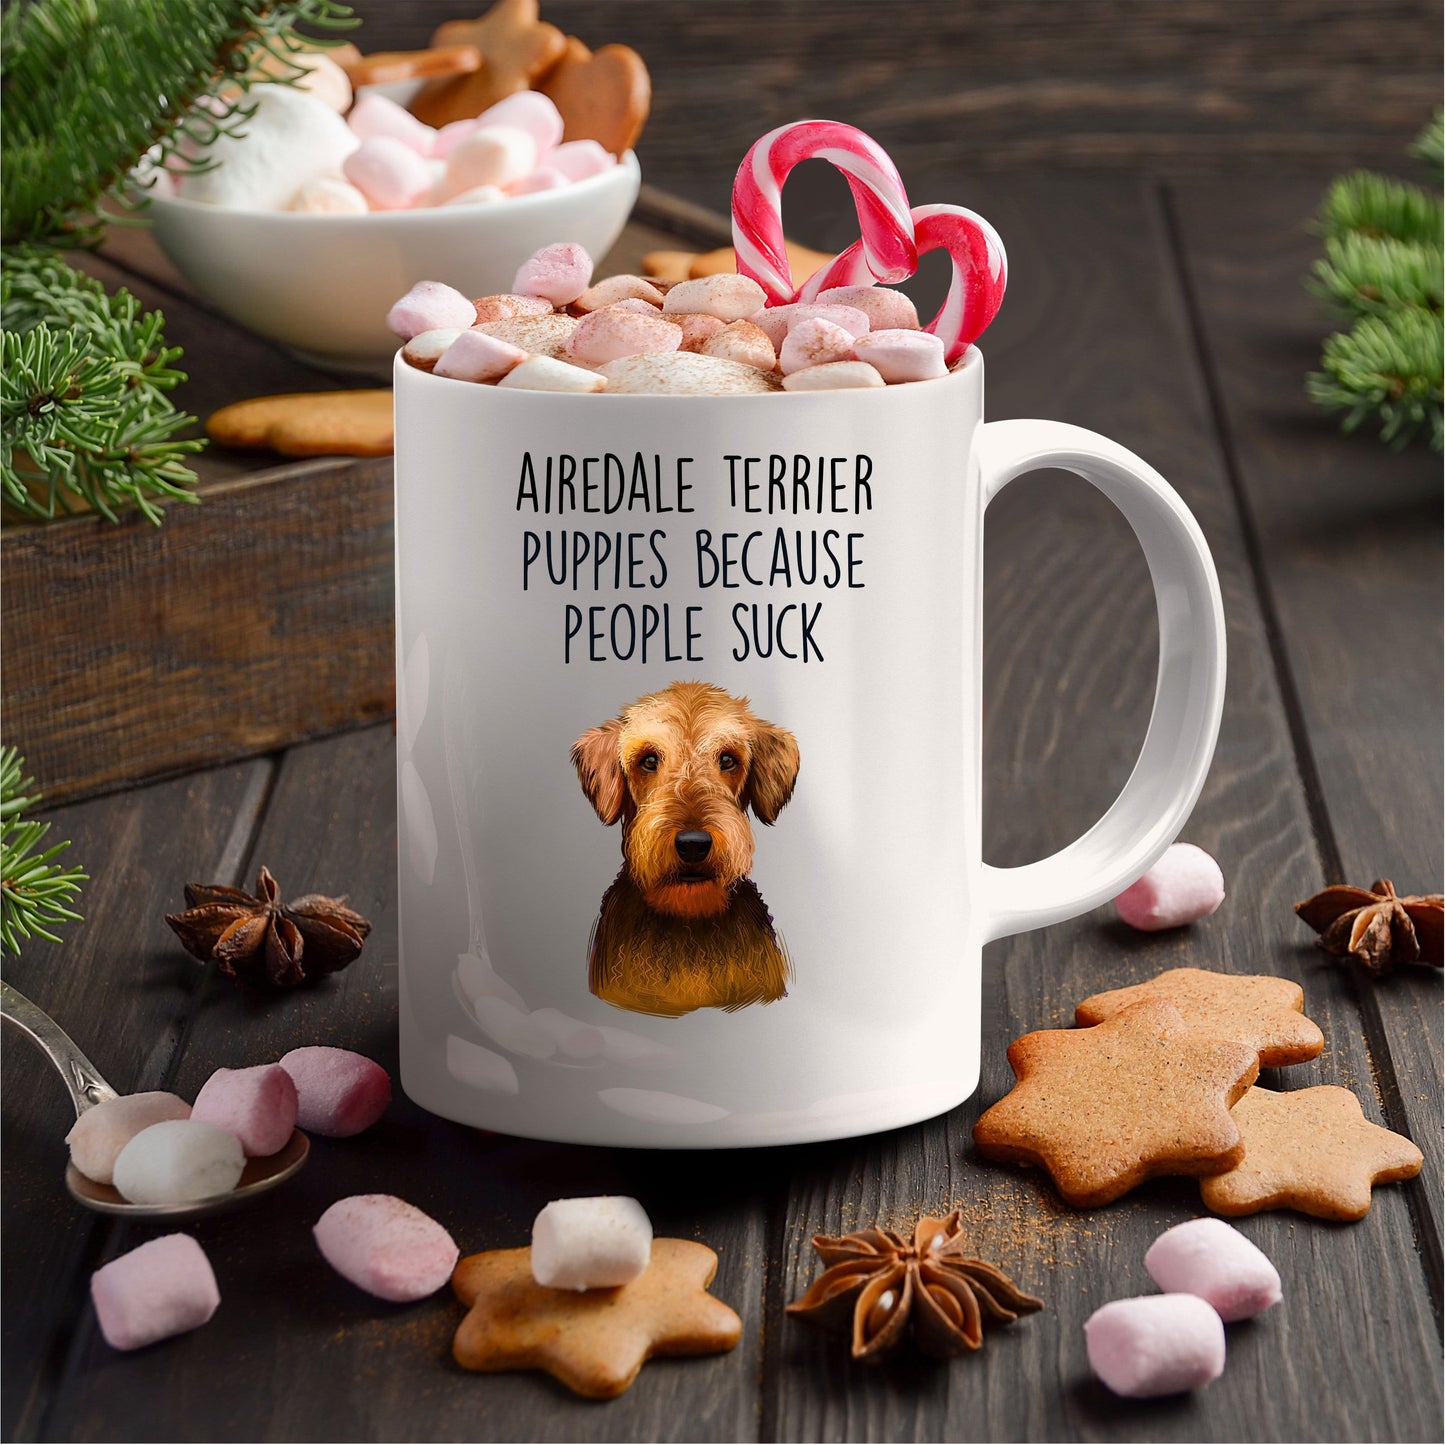 Airedale Terrier Puppies Because People Suck - Funny Dog Ceramic Mug